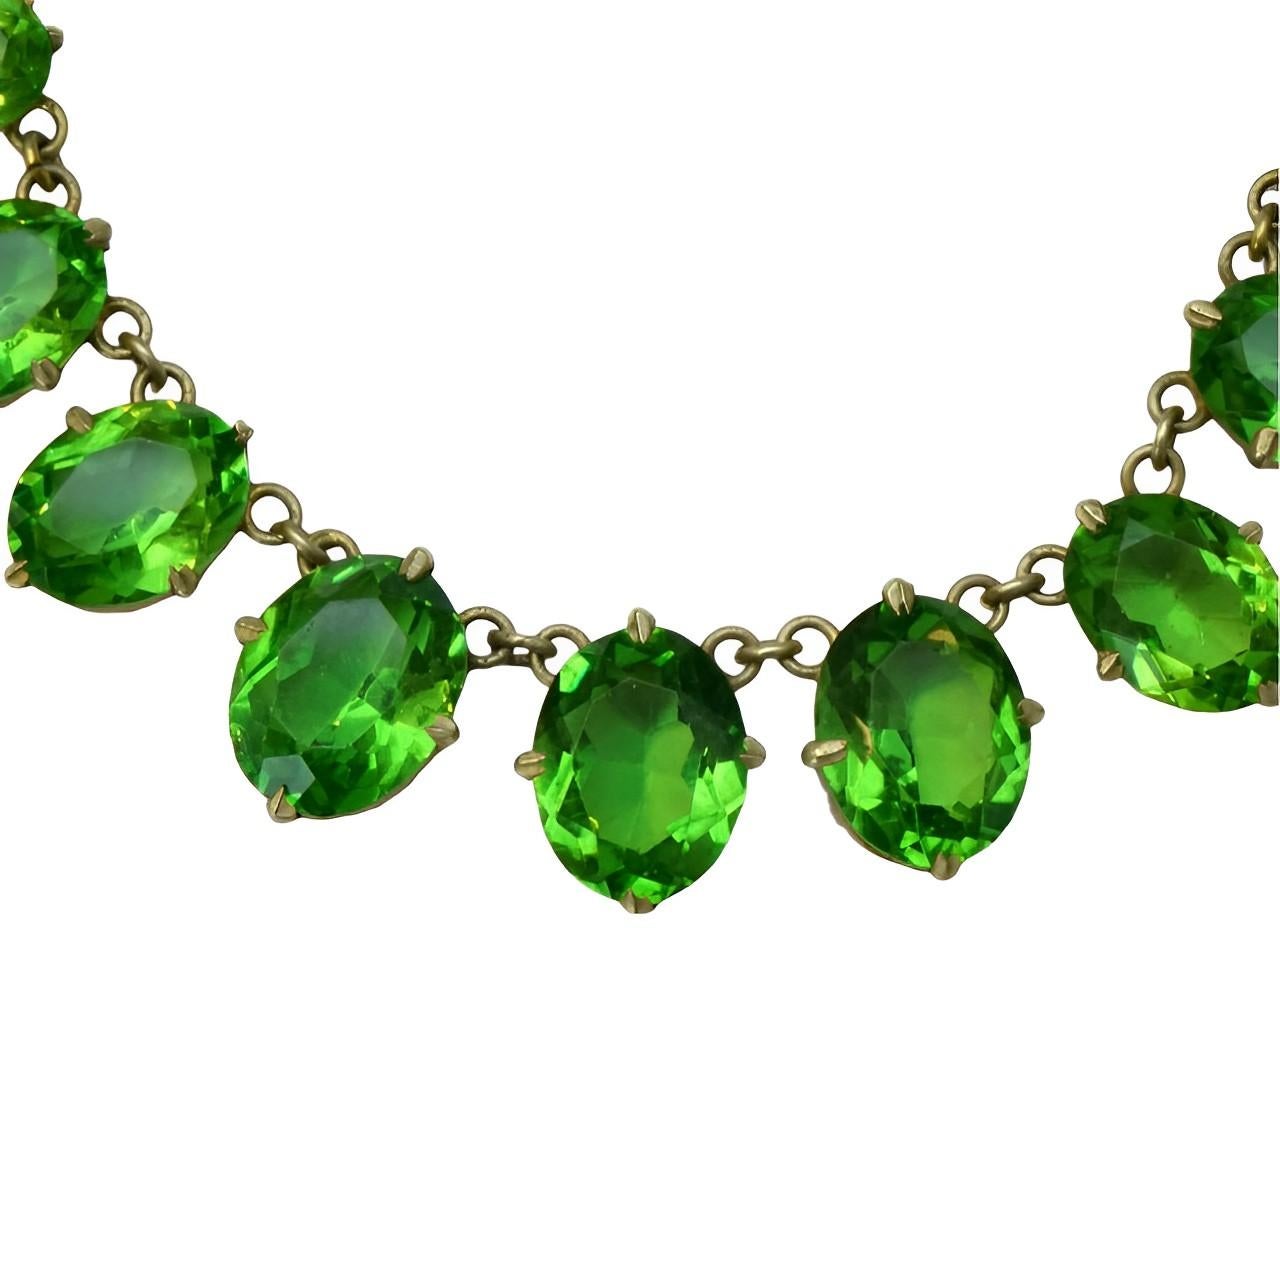 Women's or Men's Art Deco Gold Plated Necklace with Apple Green Paste Stone Drops circa 1930s For Sale